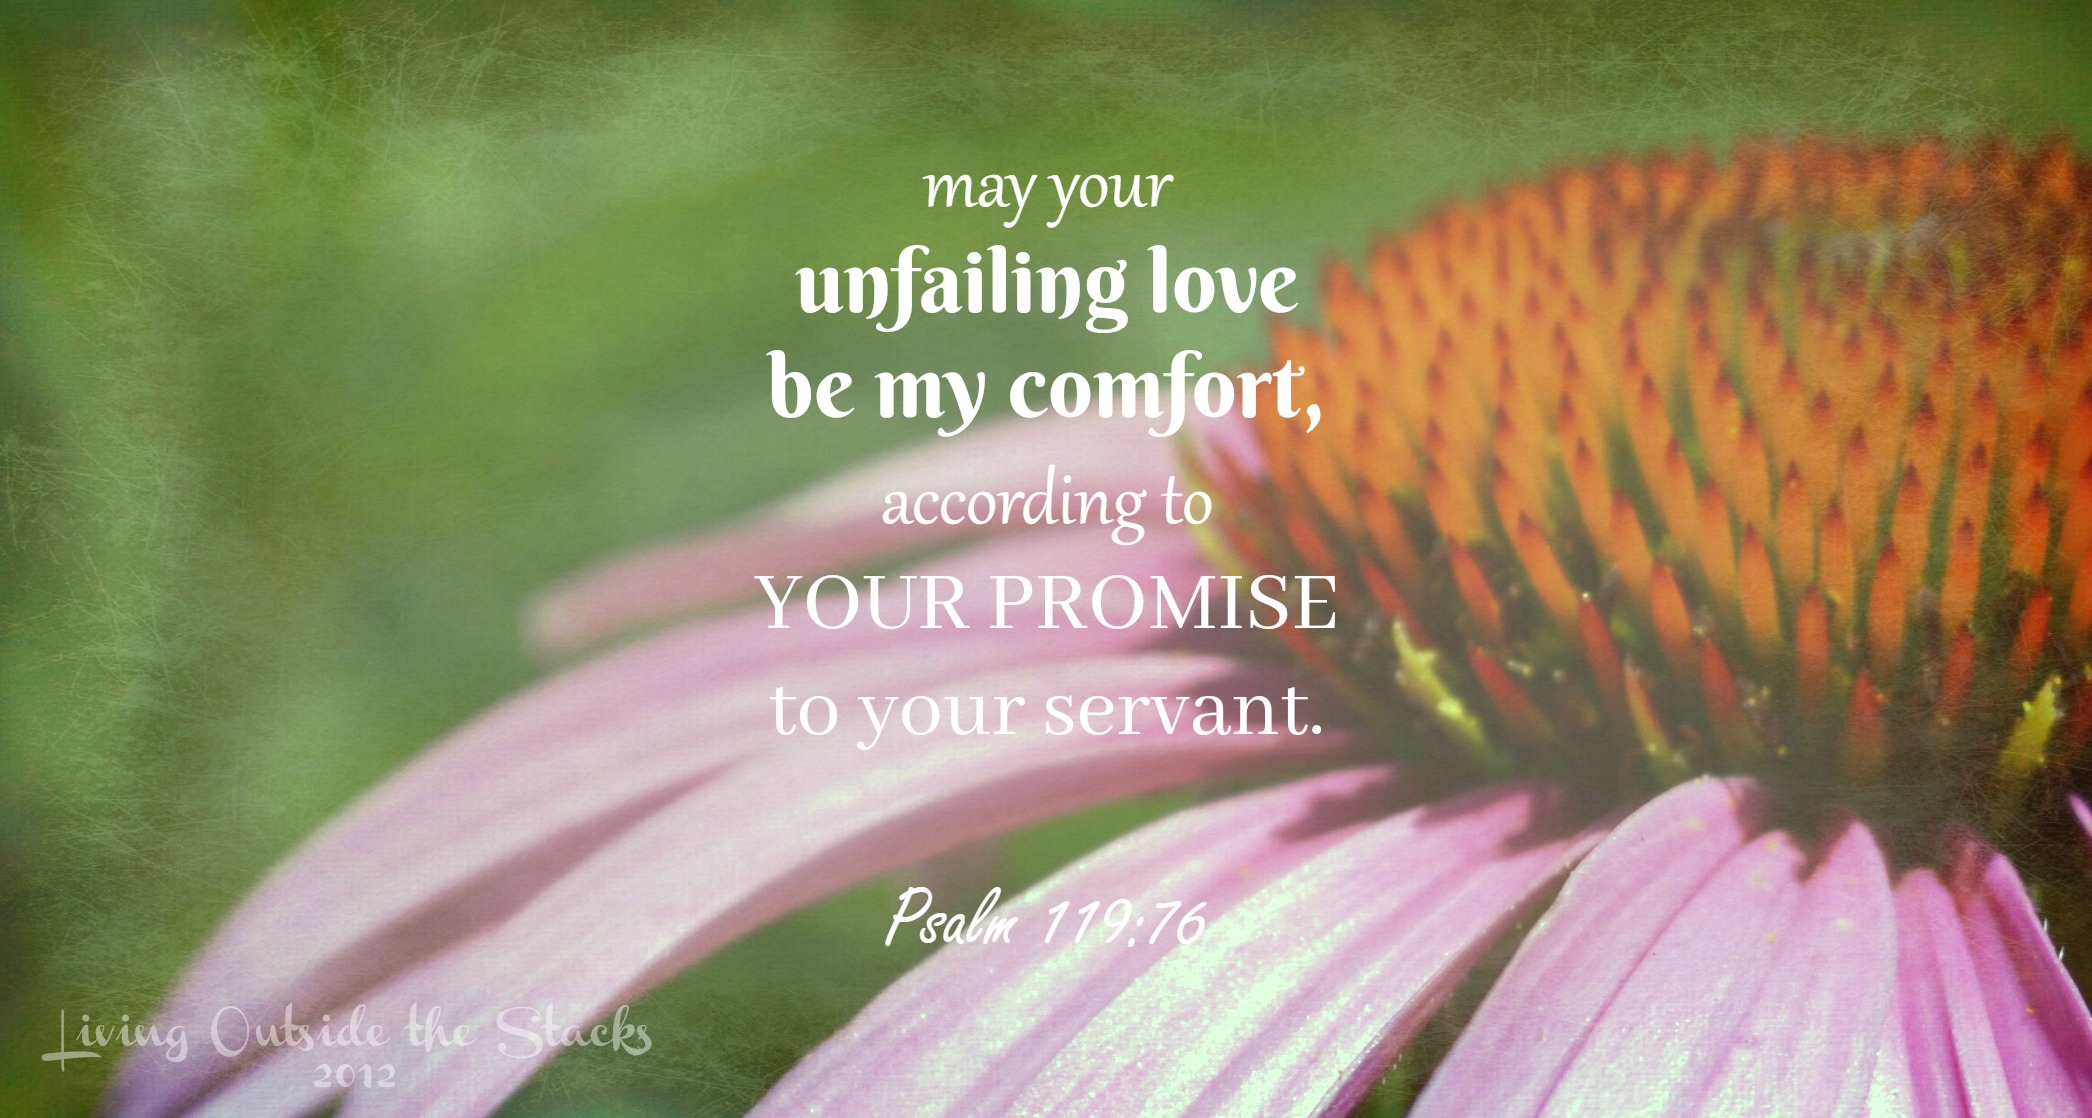 My Comfort Psalm 11976 {living outside the stacks}